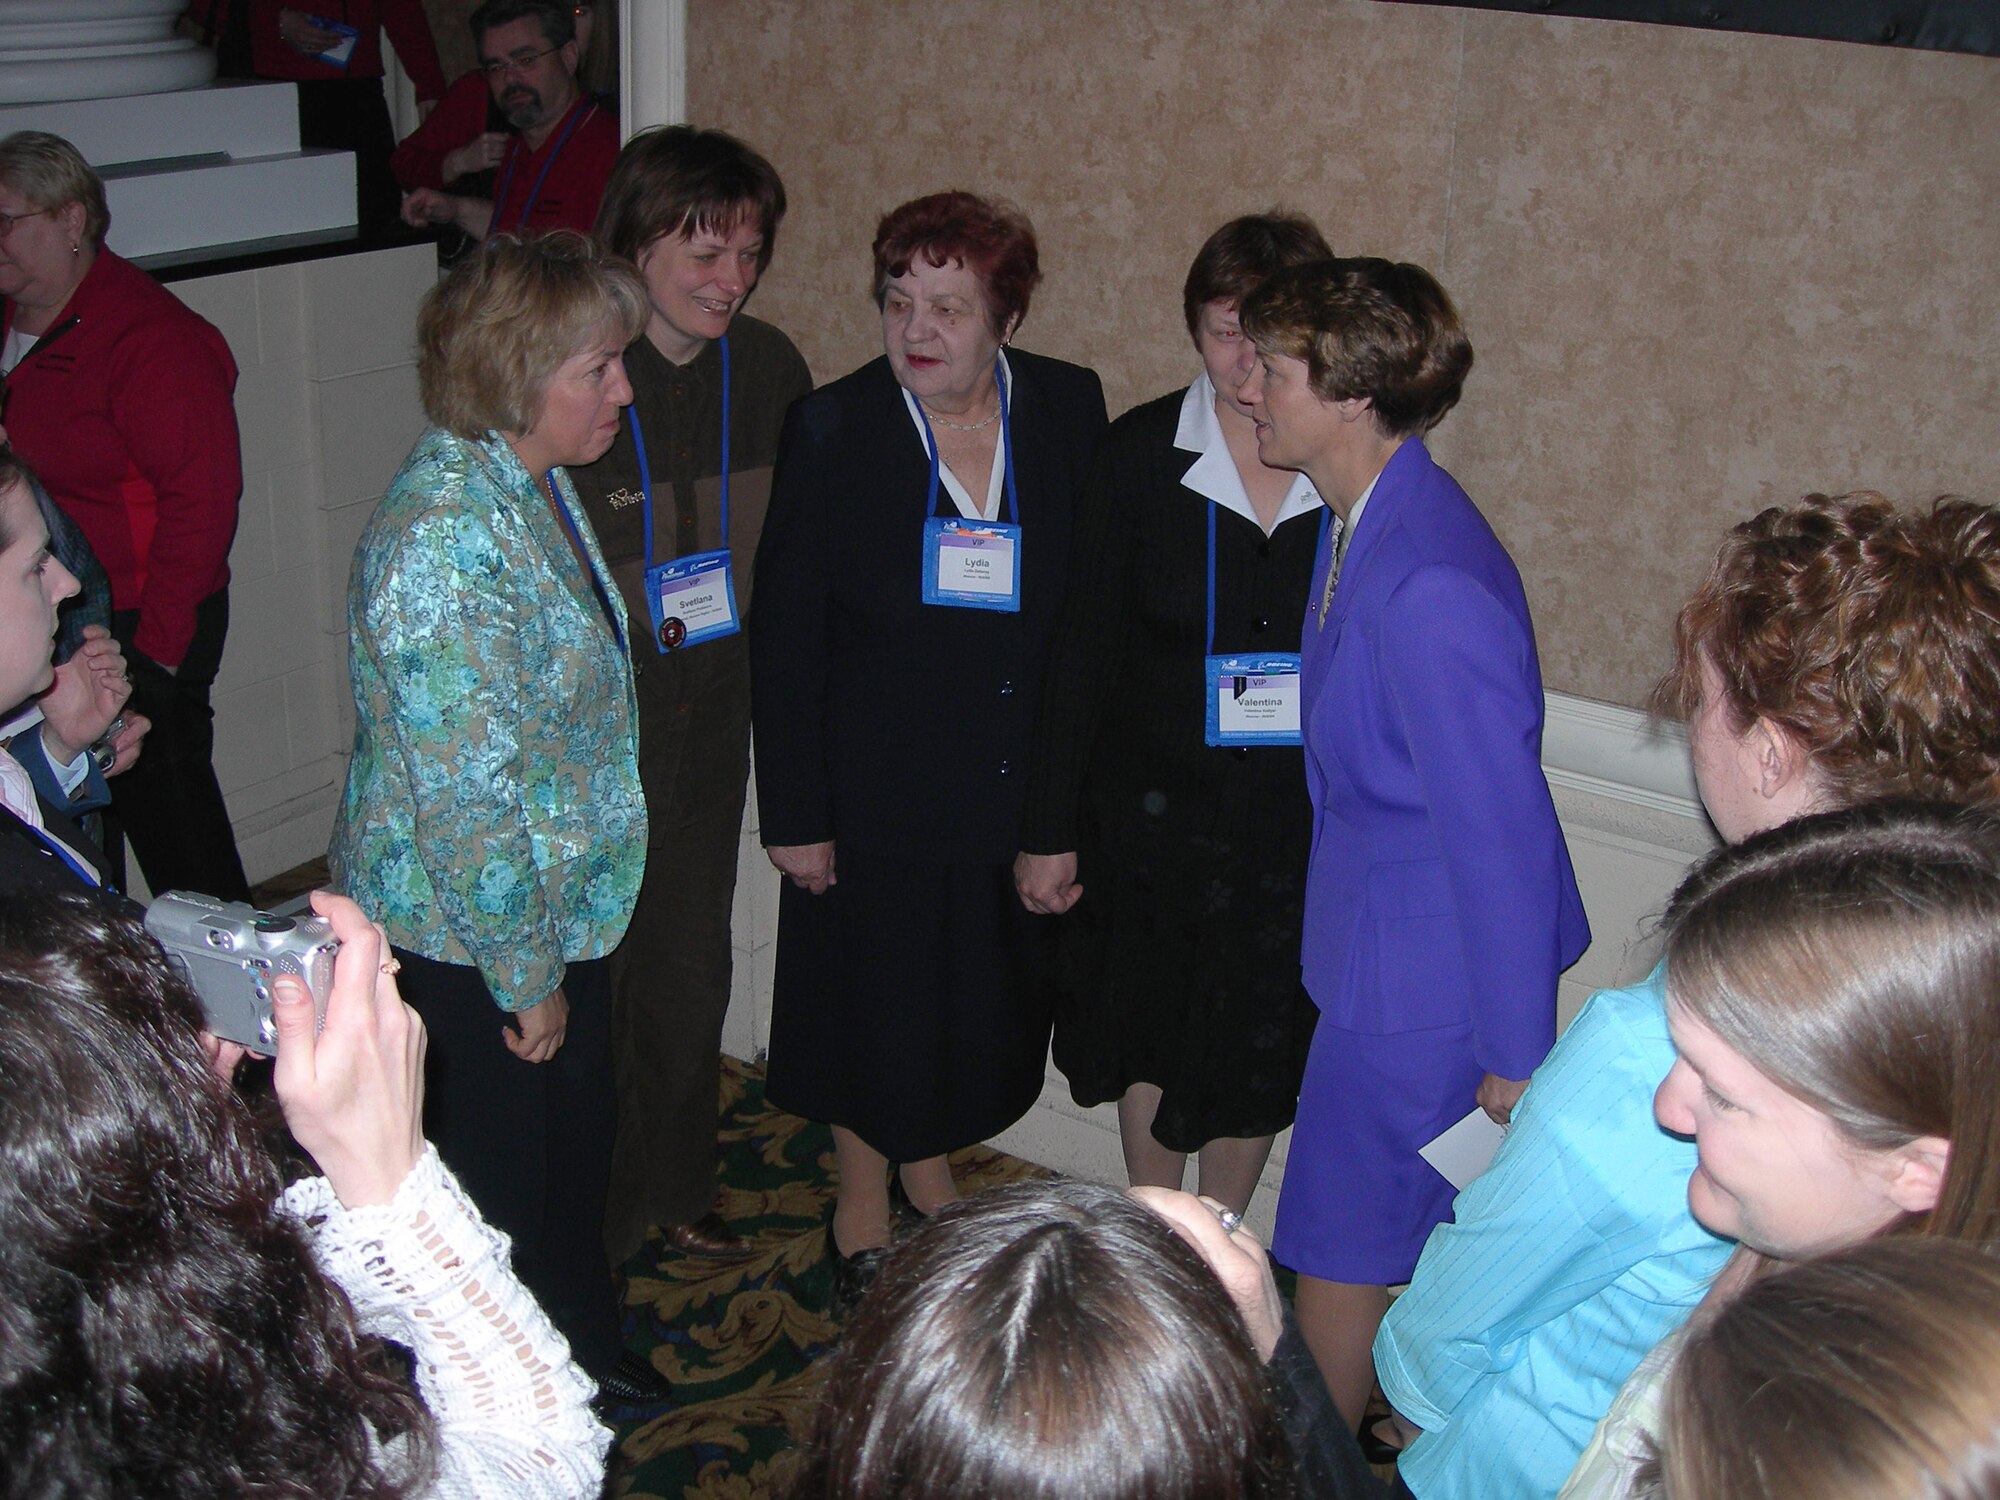 Retired Air Force Col. Eileen Collins, right, talks with Russian pilots attending the 17th Annual International Women in Aviation Conference in Nashville, Tenn., on Saturday, March 25, 2006. (U.S. Air Force photo/Annette Crawford)